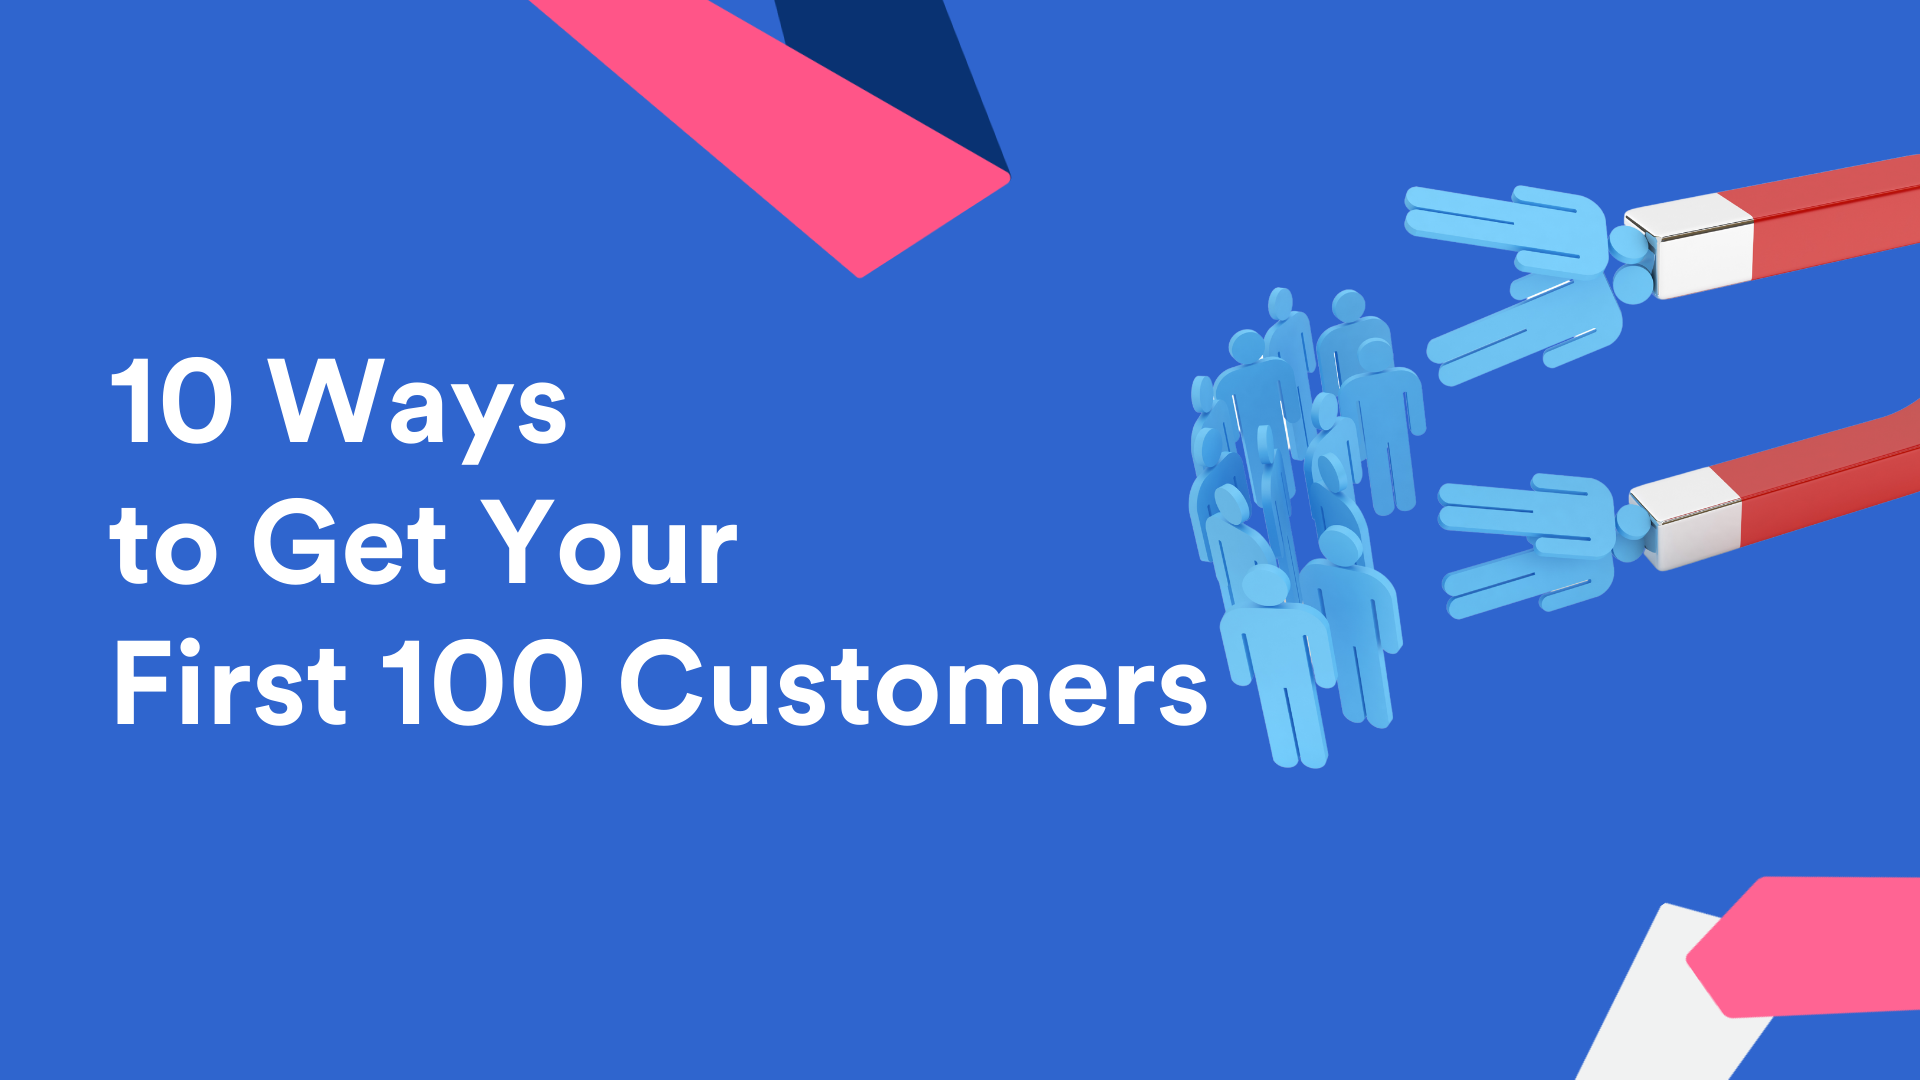 10 Ways You Should Be Doing to Get Your First 100 Customers | EasyStore